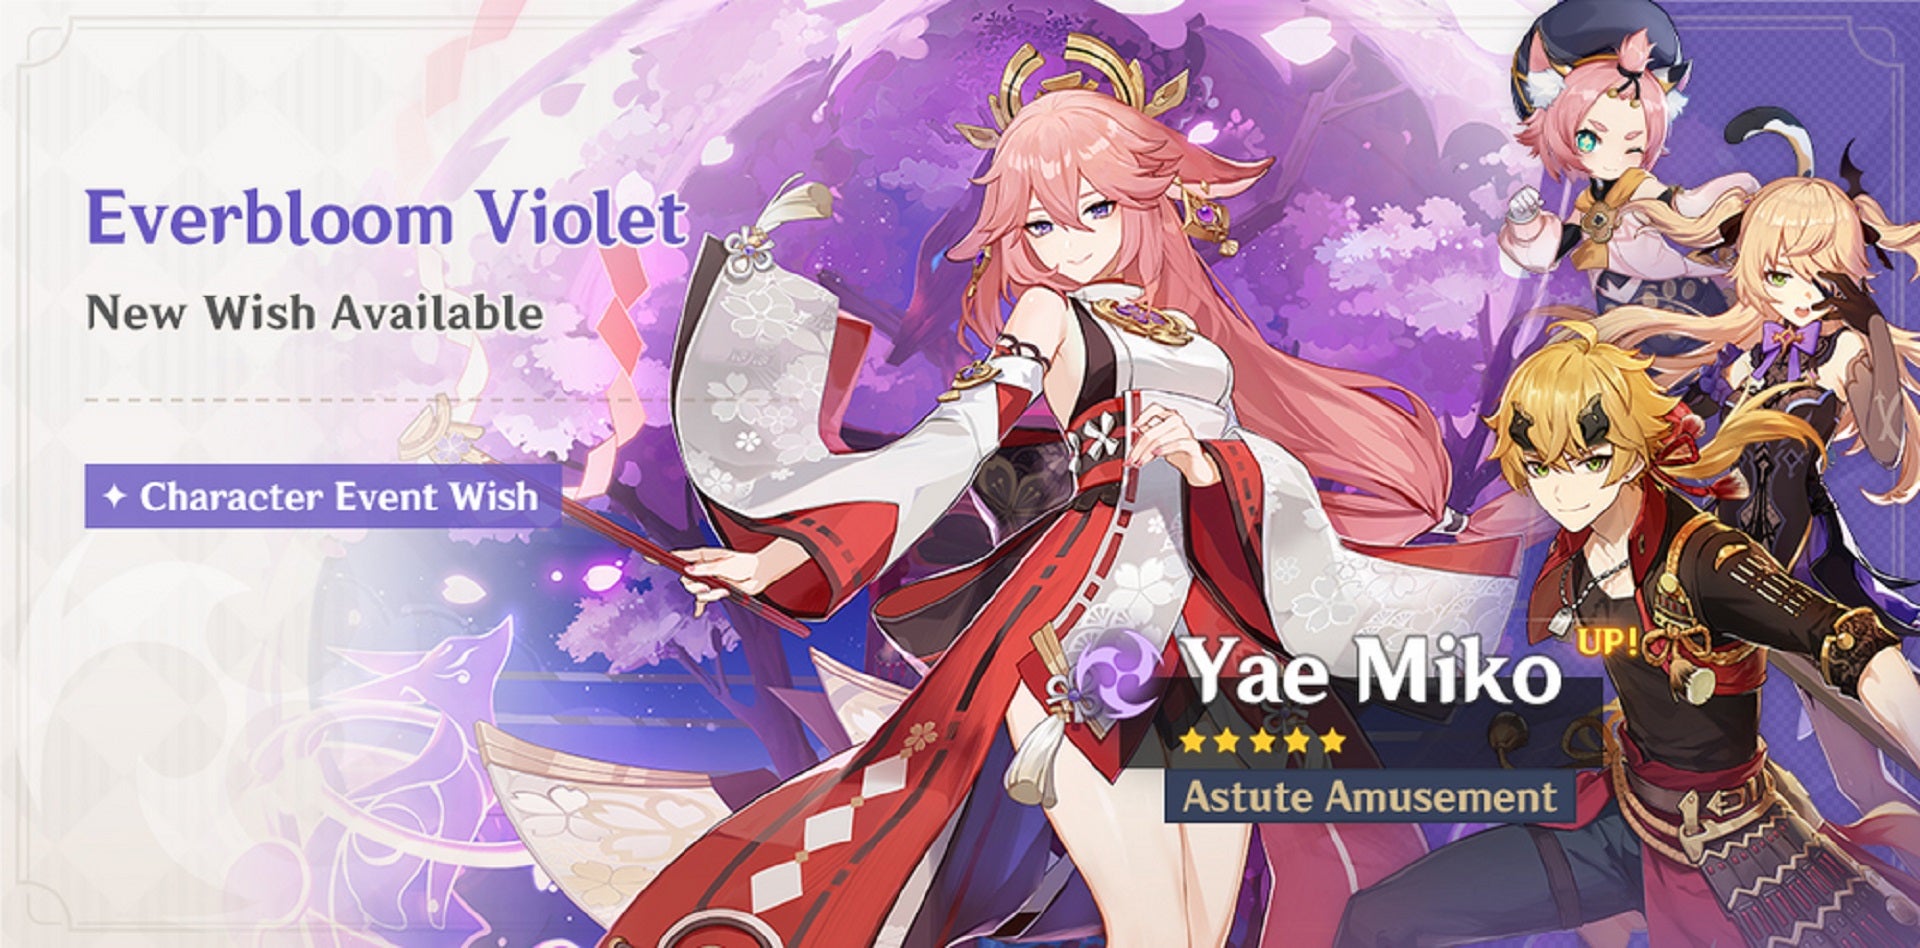 Genshin Impact's "Everbloom Violet" banner as it appeared in February 2022, featuring Yae Miko alongside Thoma, Diona, and Fischl.